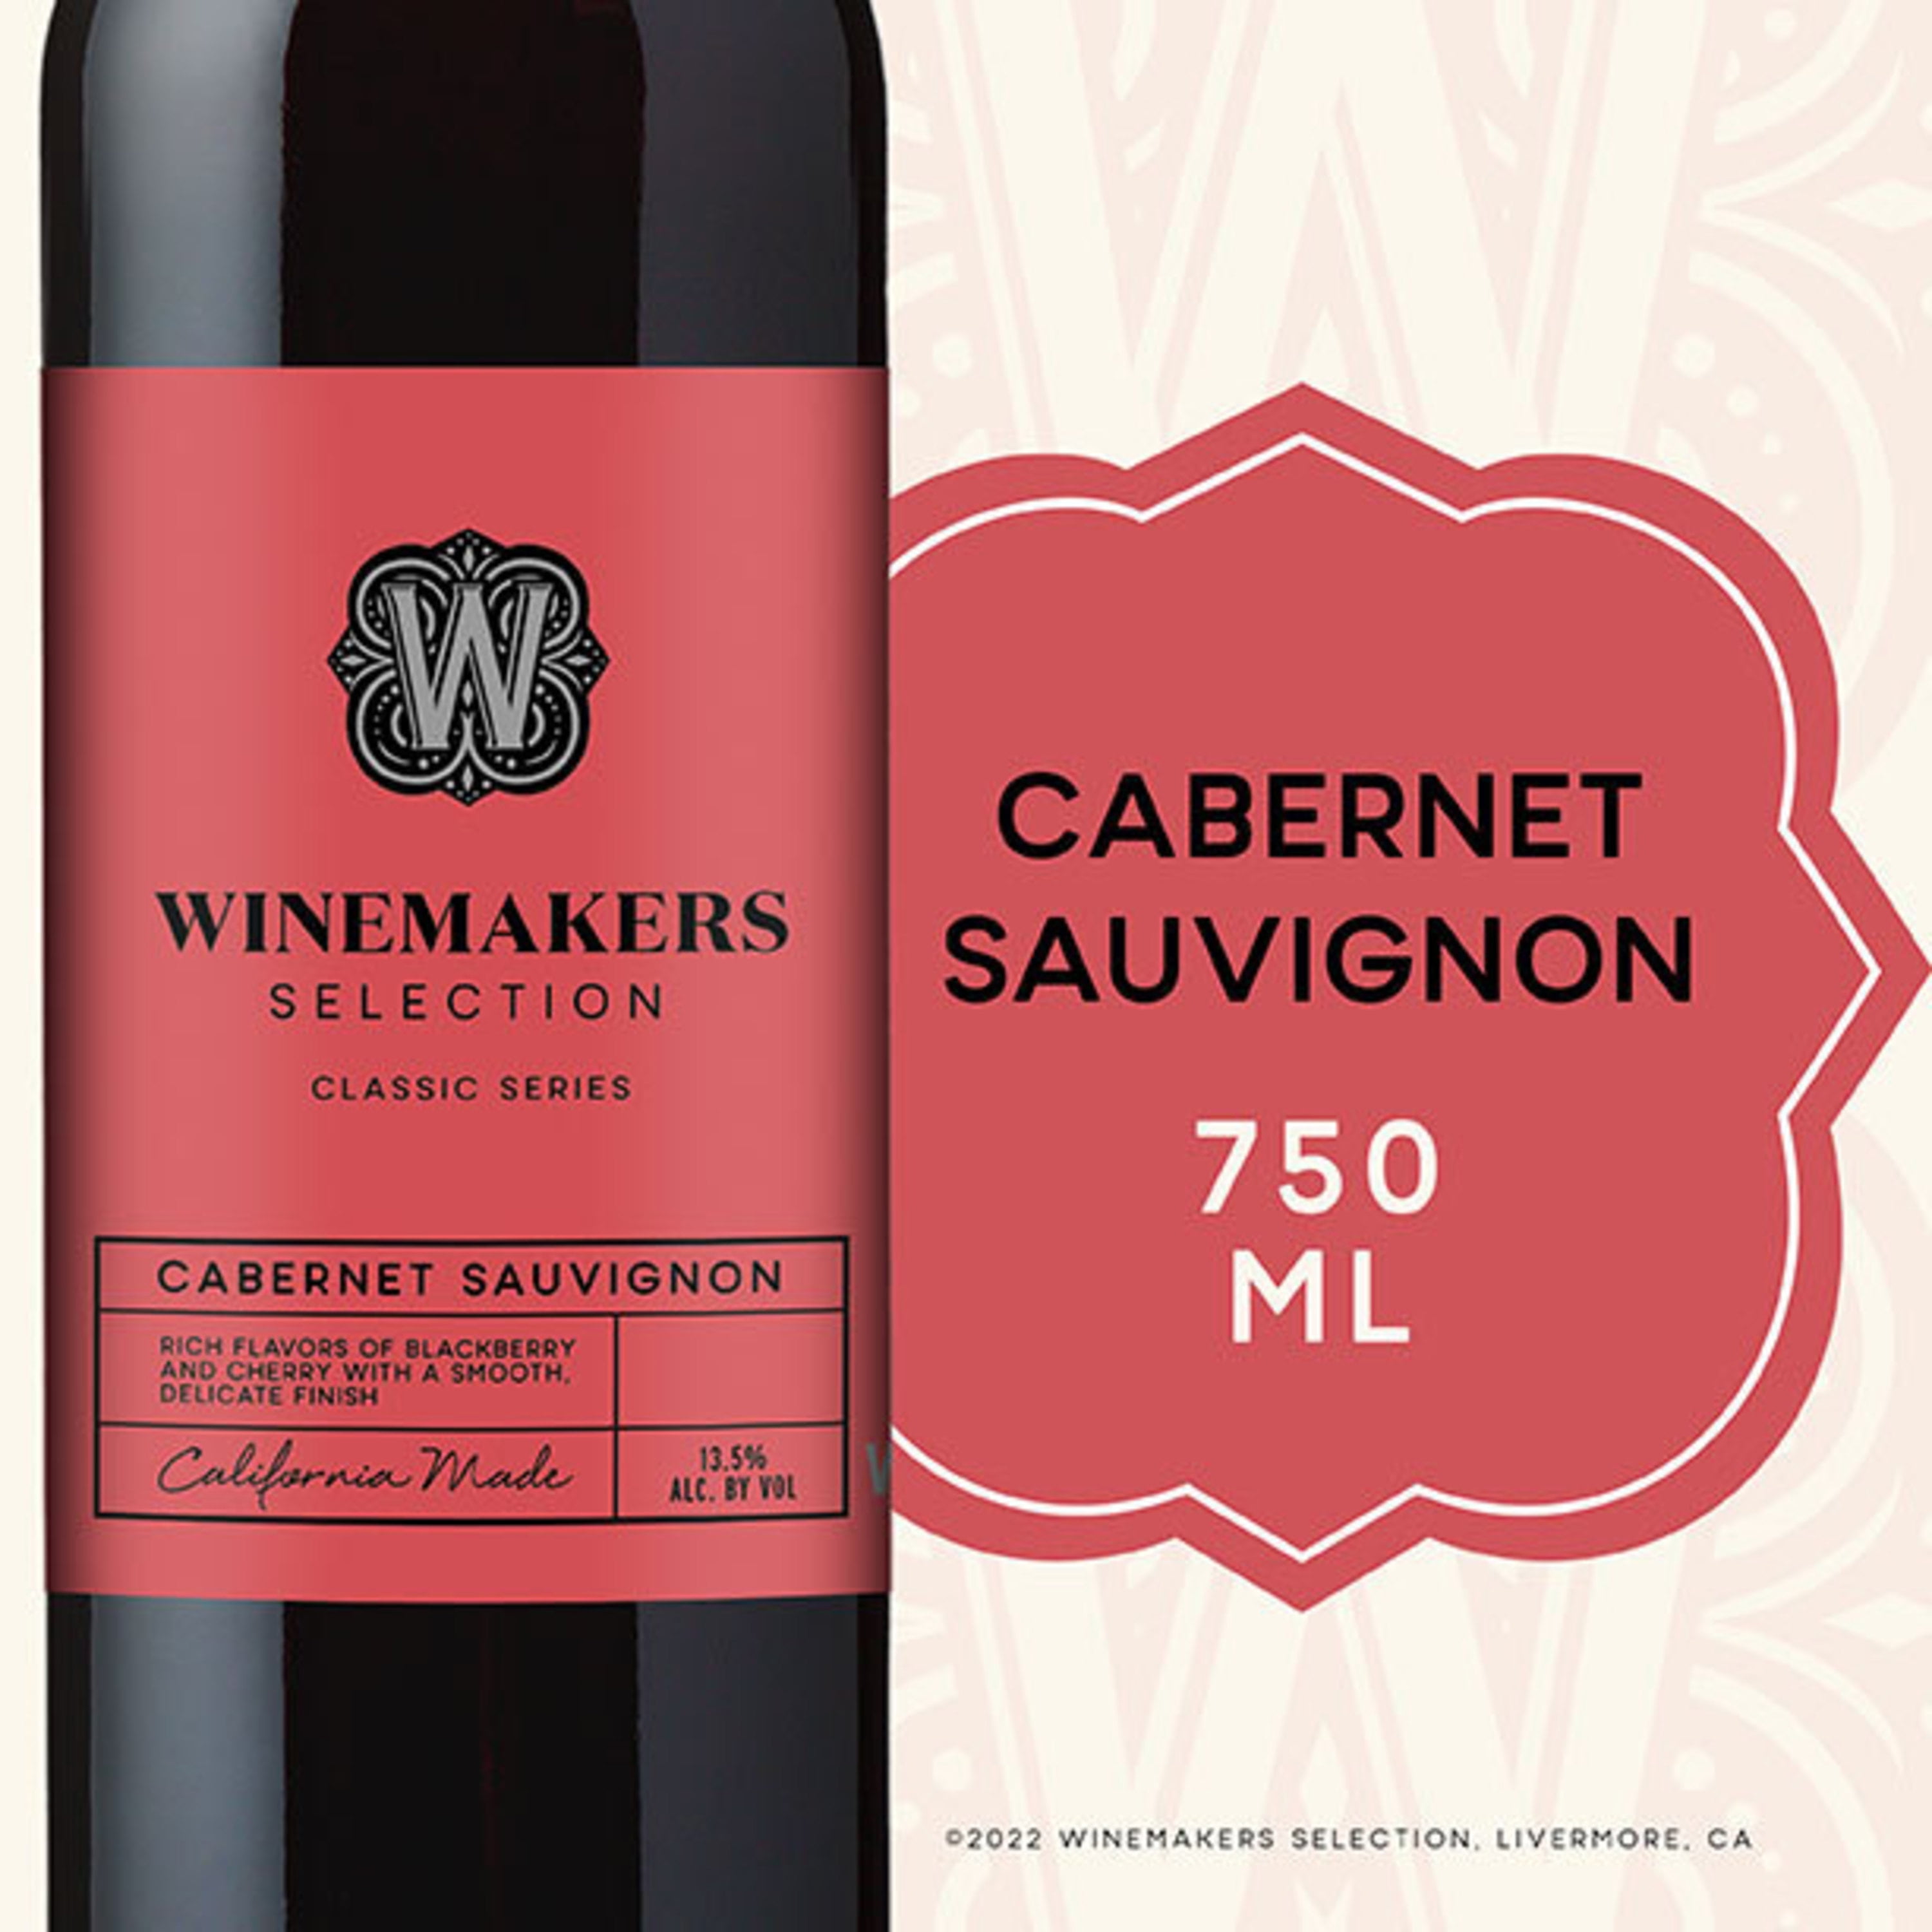 Winemakers Selection Cabernet Sauvignon Red Wine - 750ml, 2018